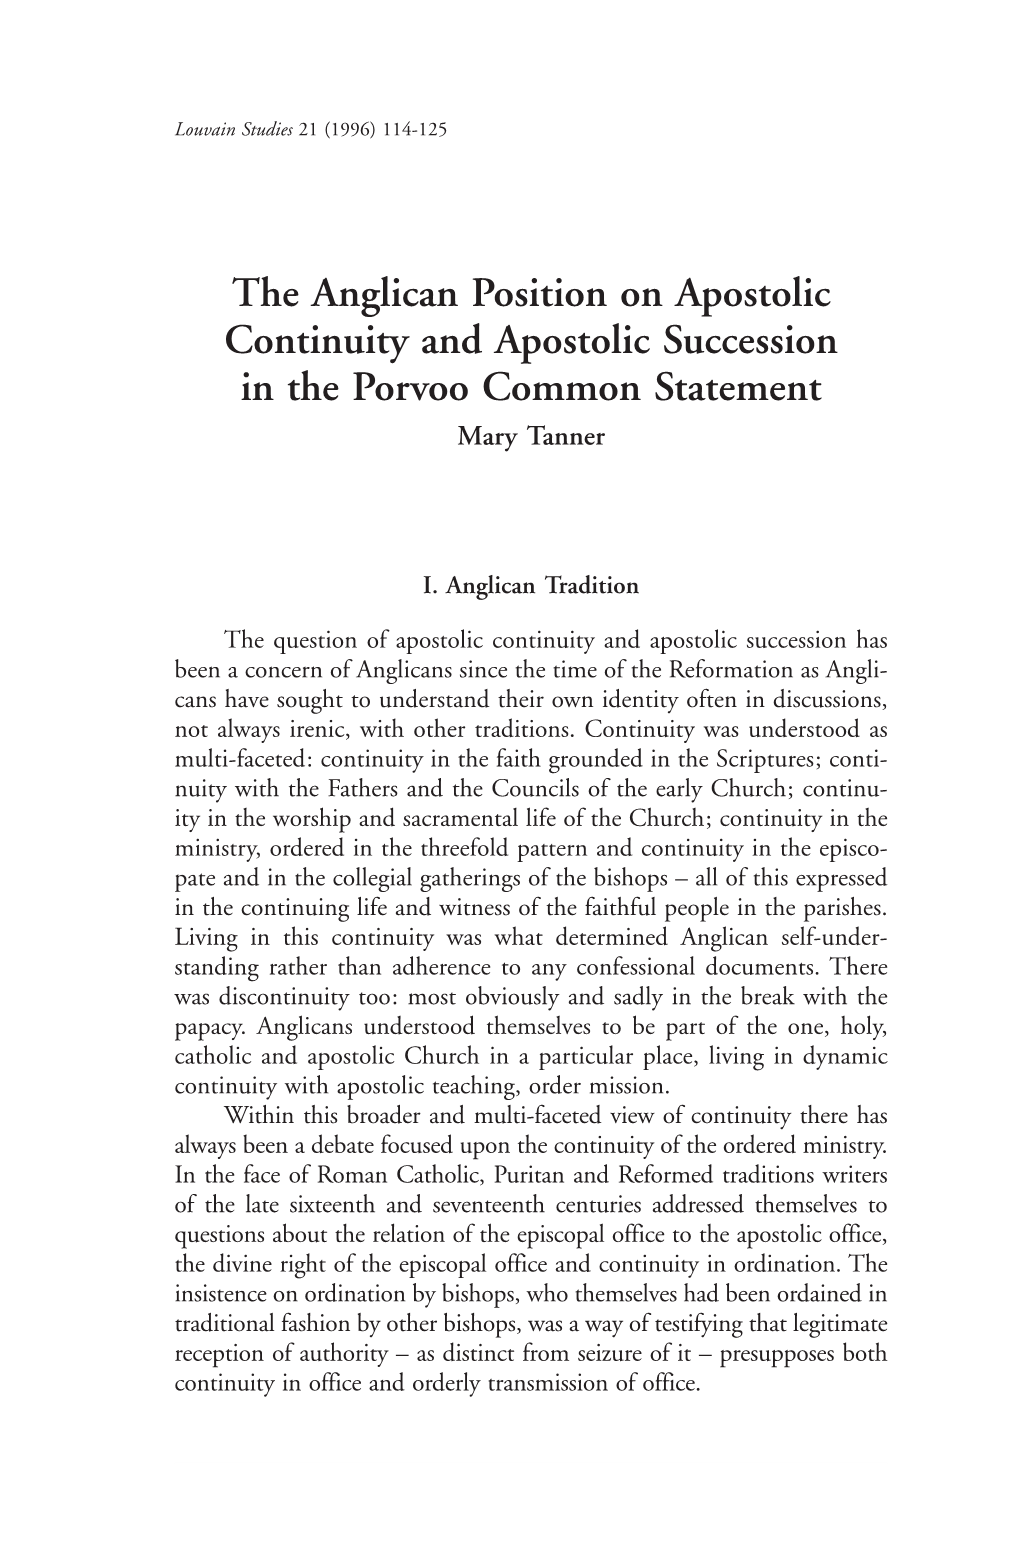 The Anglican Position on Apostolic Continuity and Apostolic Succession in the Porvoo Common Statement Mary Tanner